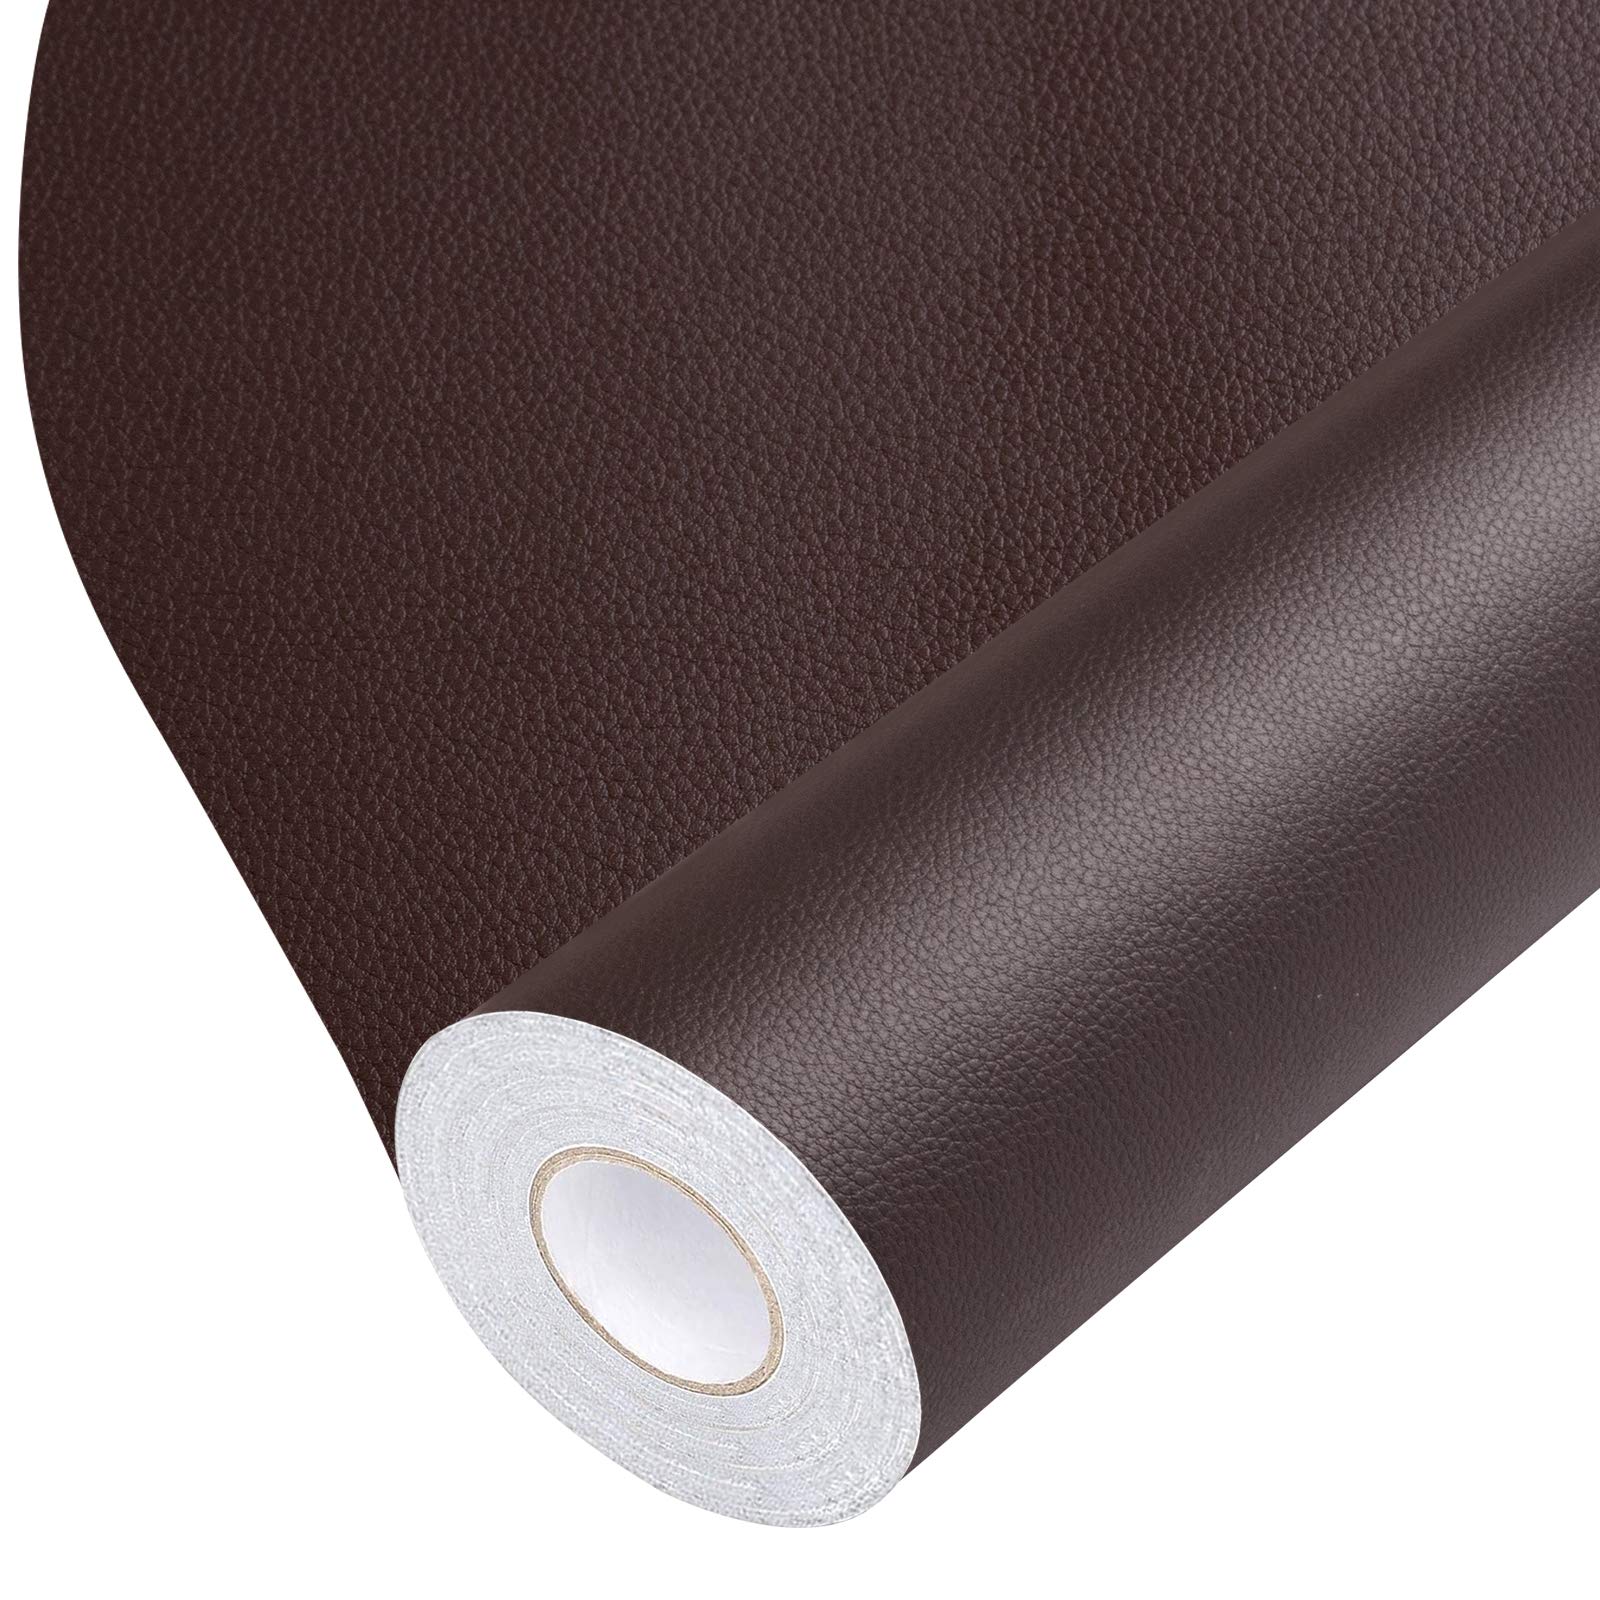  Self-Adhesive Leather Patch Waterproof Sticky